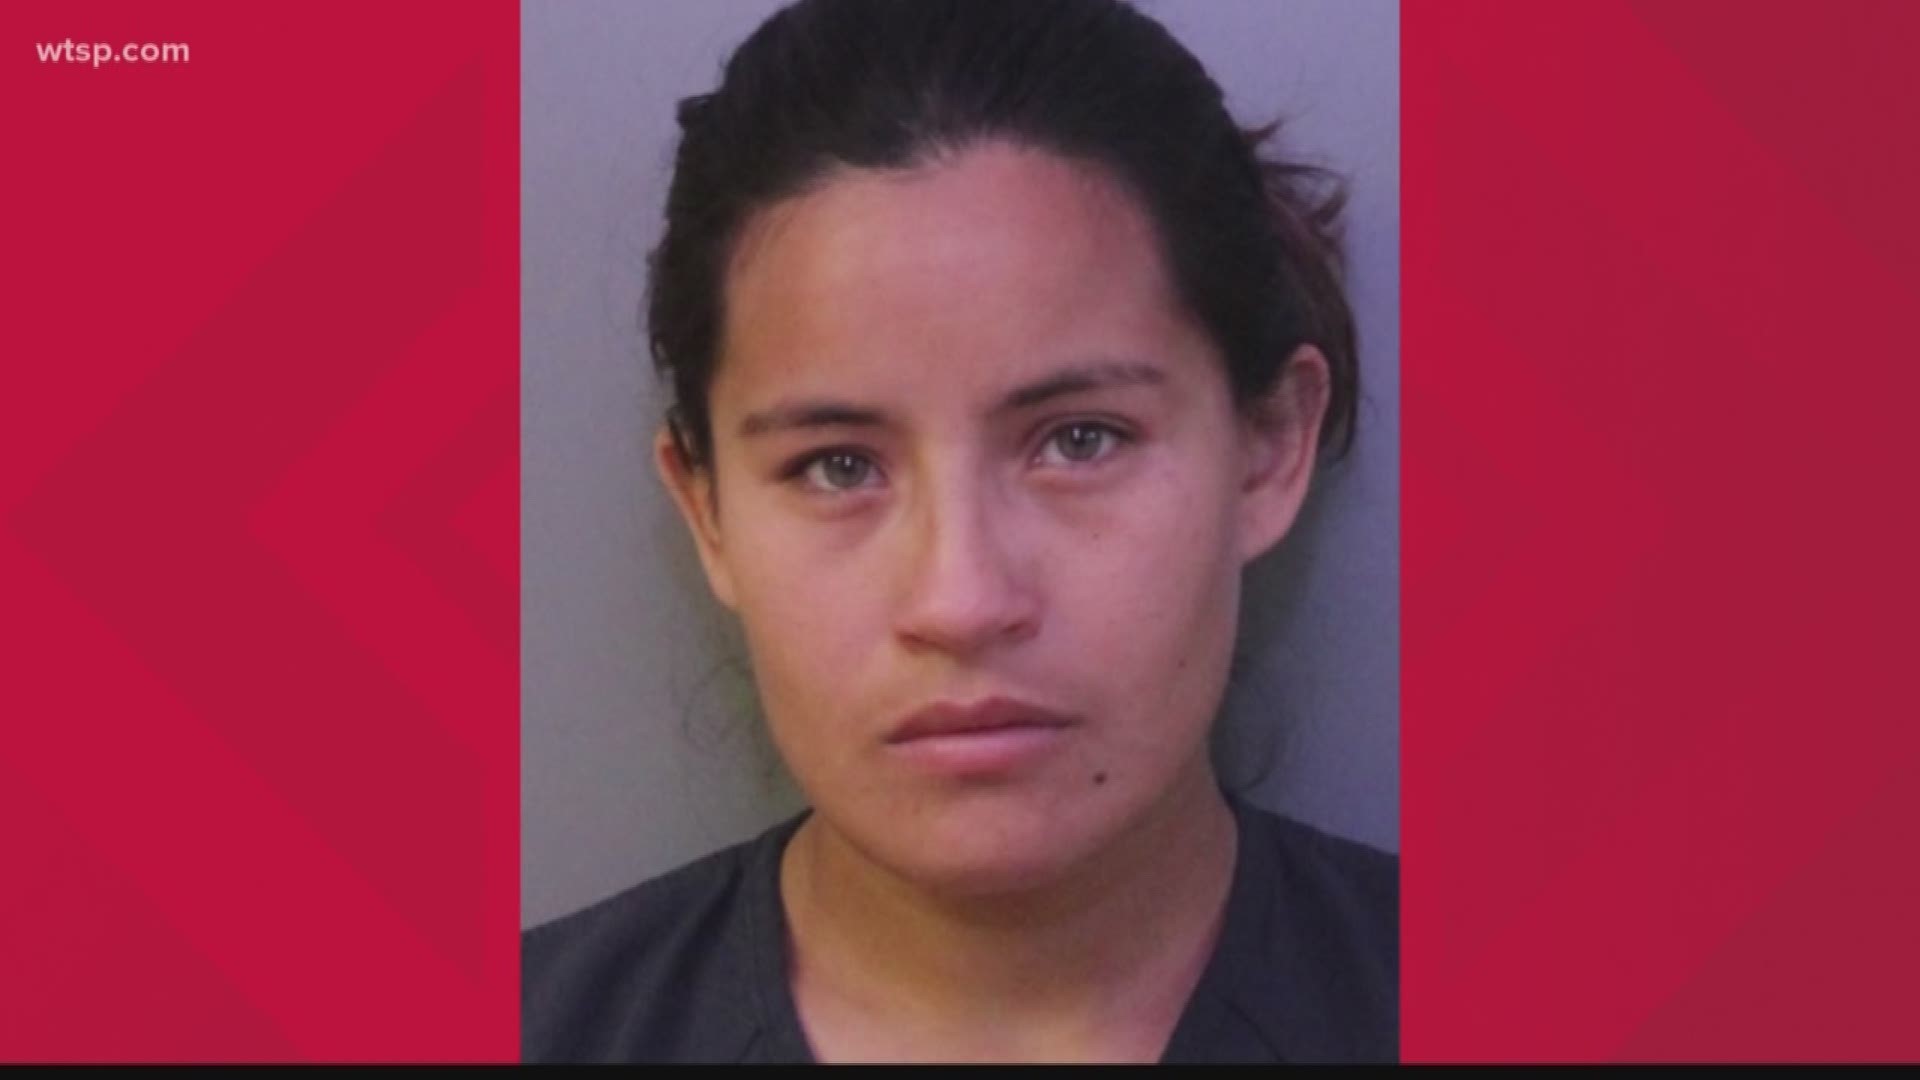 A 25-year-old driver without a valid license is accused of fatally striking a Florida teen who was riding her bike to school Wednesday morning in Polk County.

Micaela Coronel, 25, is from Argentina but had been staying in Kissimmee, according to law enforcement.